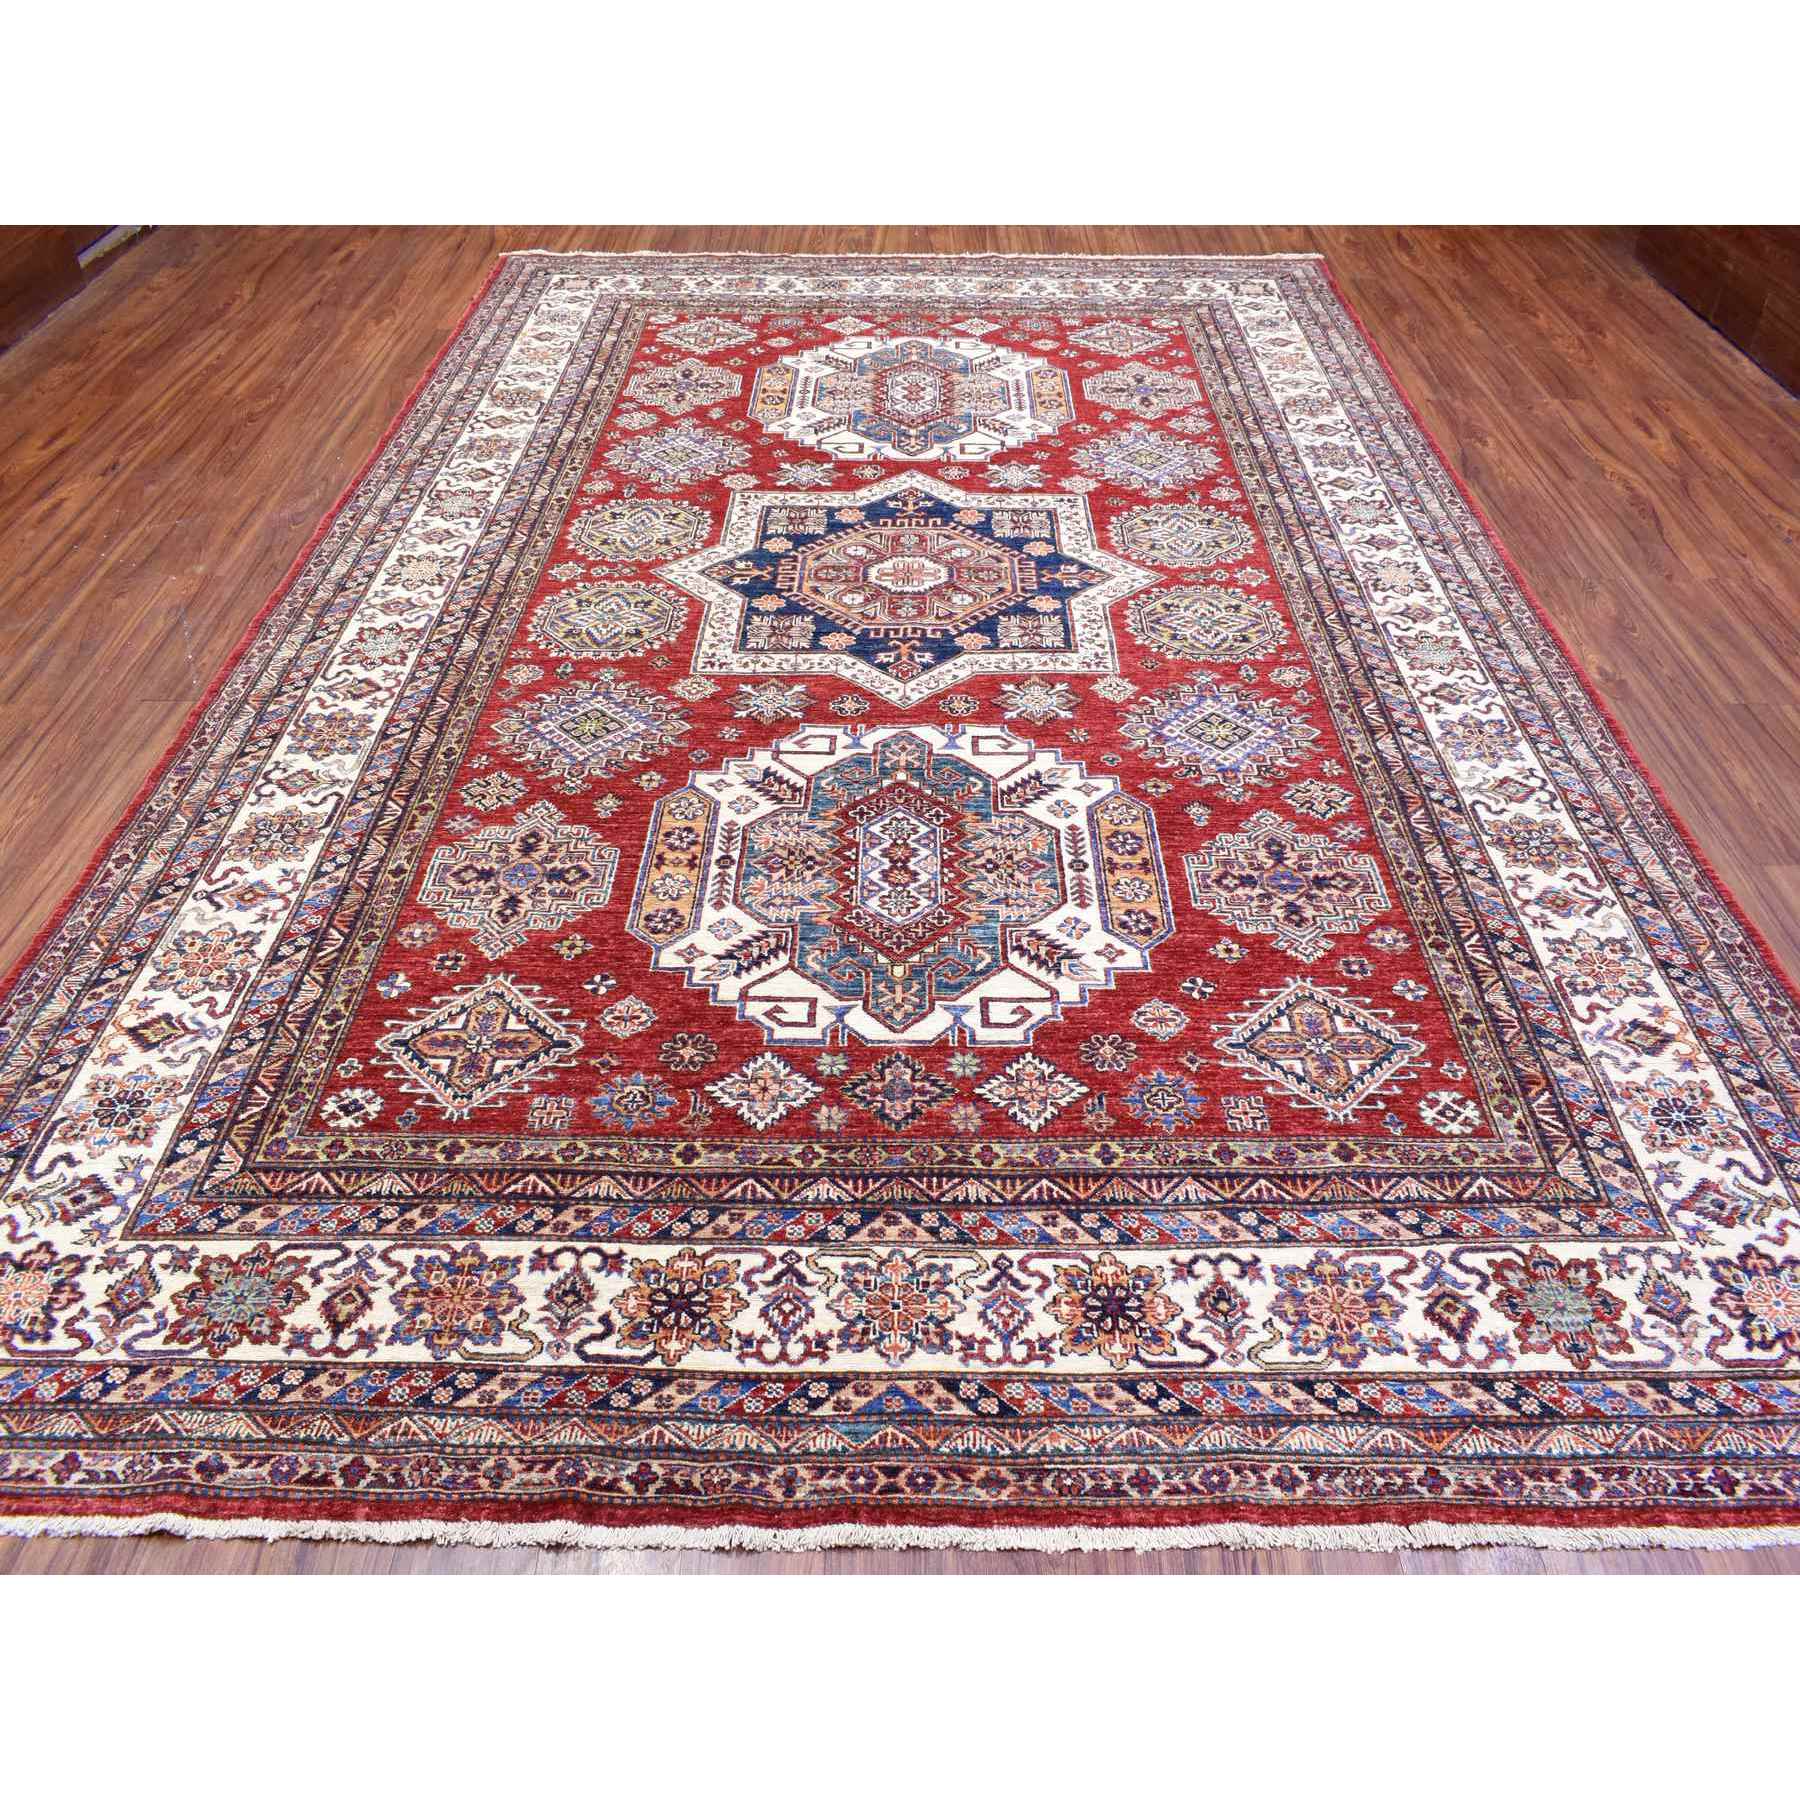 8'10"x13' Brick Red, Afghan Super Kazak with Khorjin Design Natural Dyes, Densely Weave Pure Wool Hand Woven, Oriental Rug 